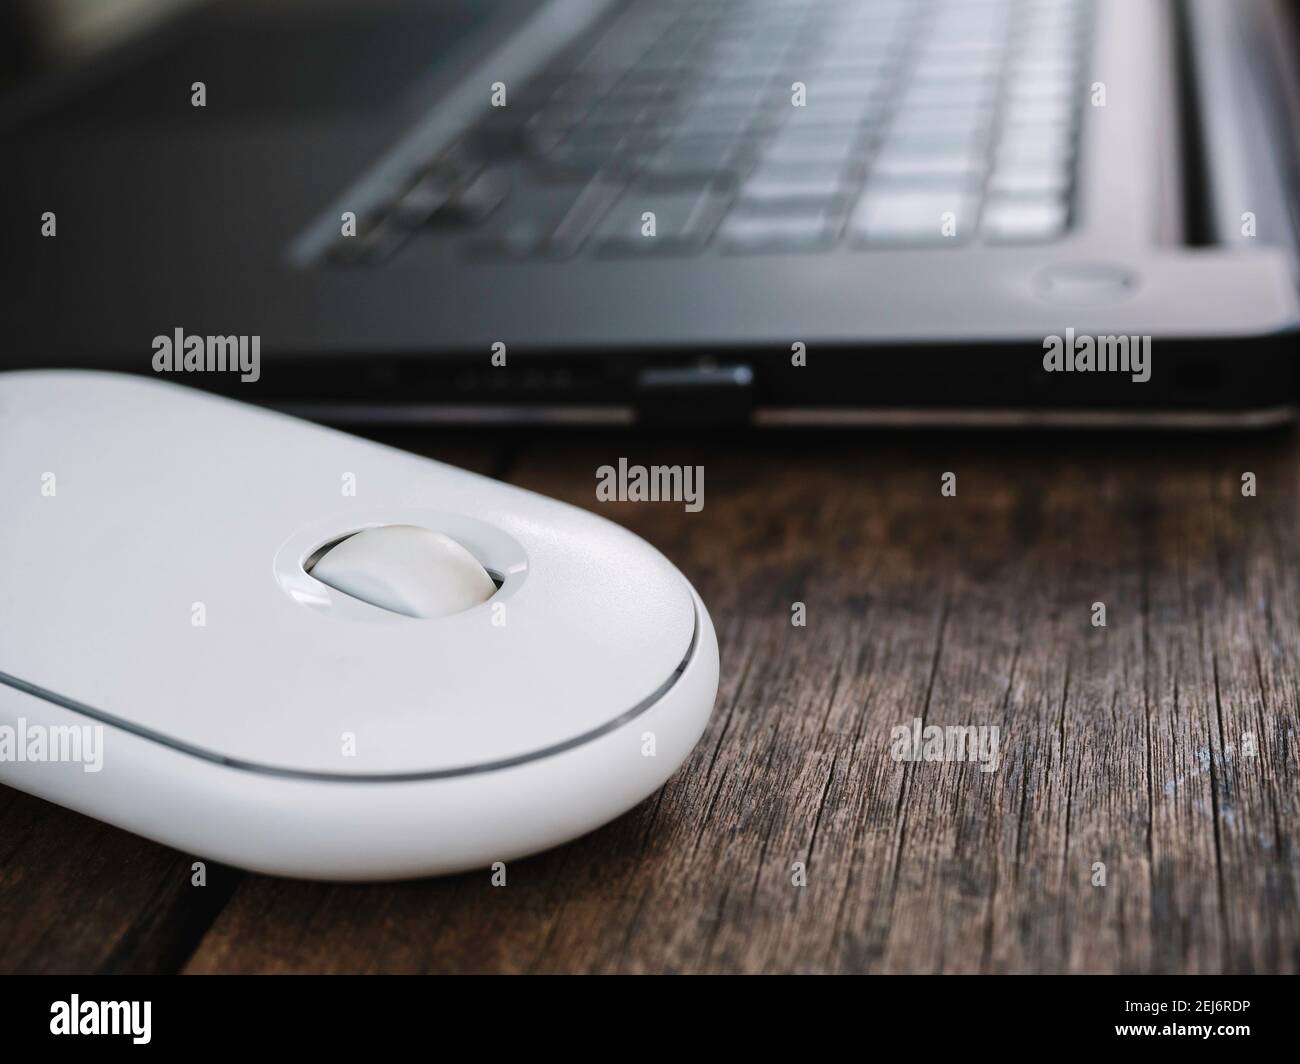 Close up modern white wireless mouse beside black laptop computer on wooden desk. Stock Photo